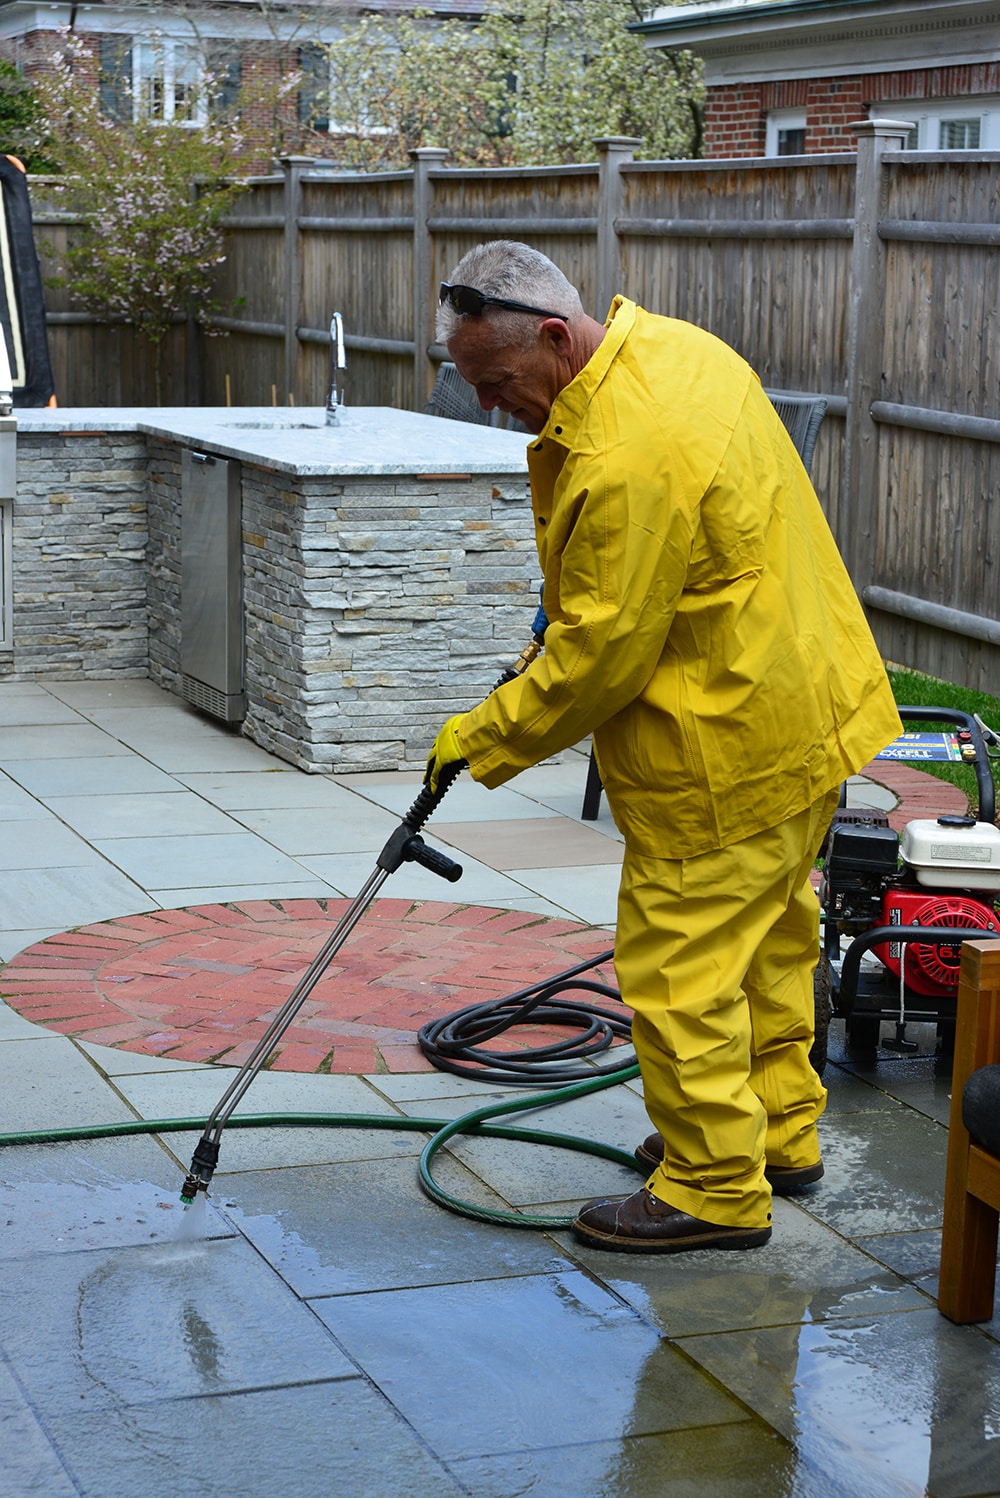 Window Cleaning & Pressure Washing Services for Cape Cod